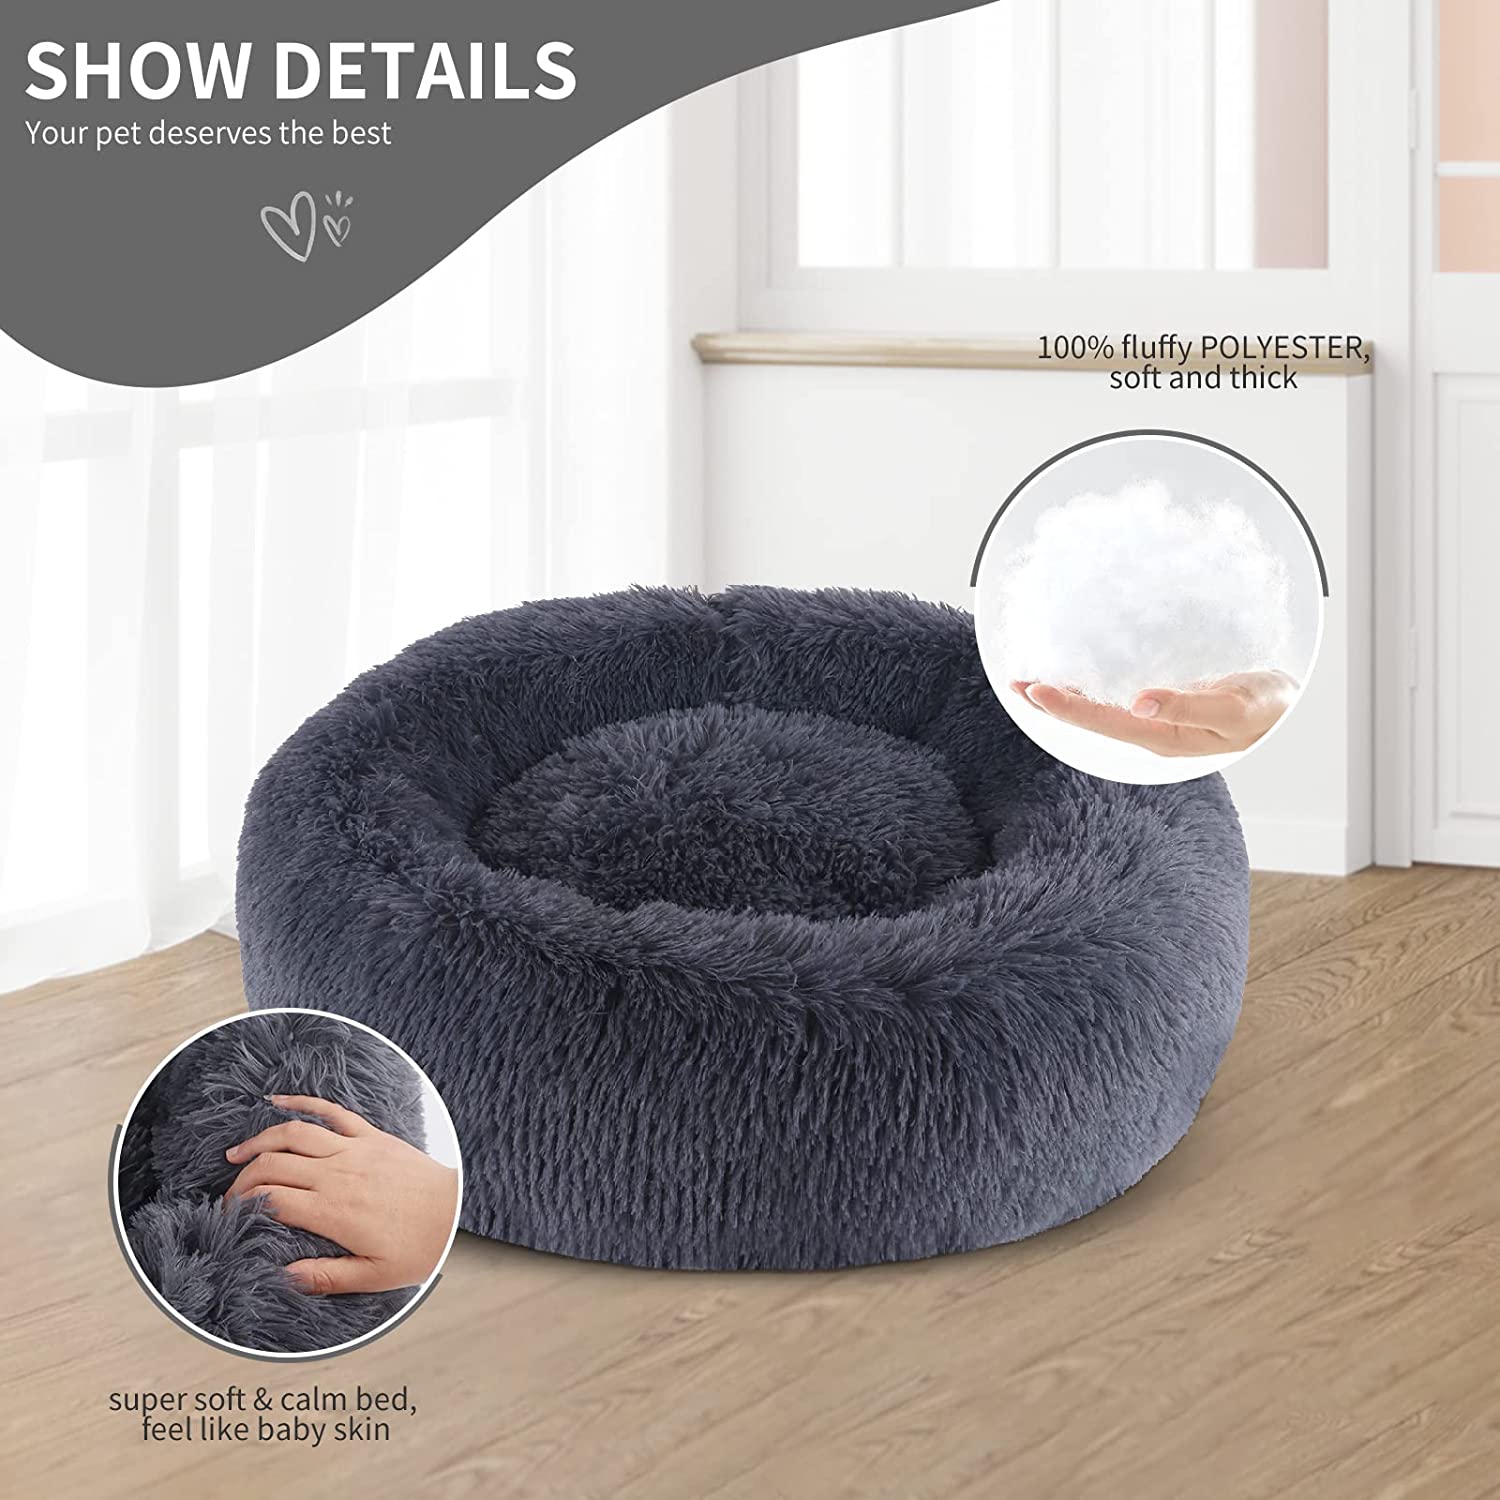 28 Inch Round Plush Pet Bed for Dogs & Cats, Fluffy Soft Warm Calming Dog Bed Cozy Faux Fur Dog Bed Sleeping Kennel Nest, Dark Grey - image 2 of 9